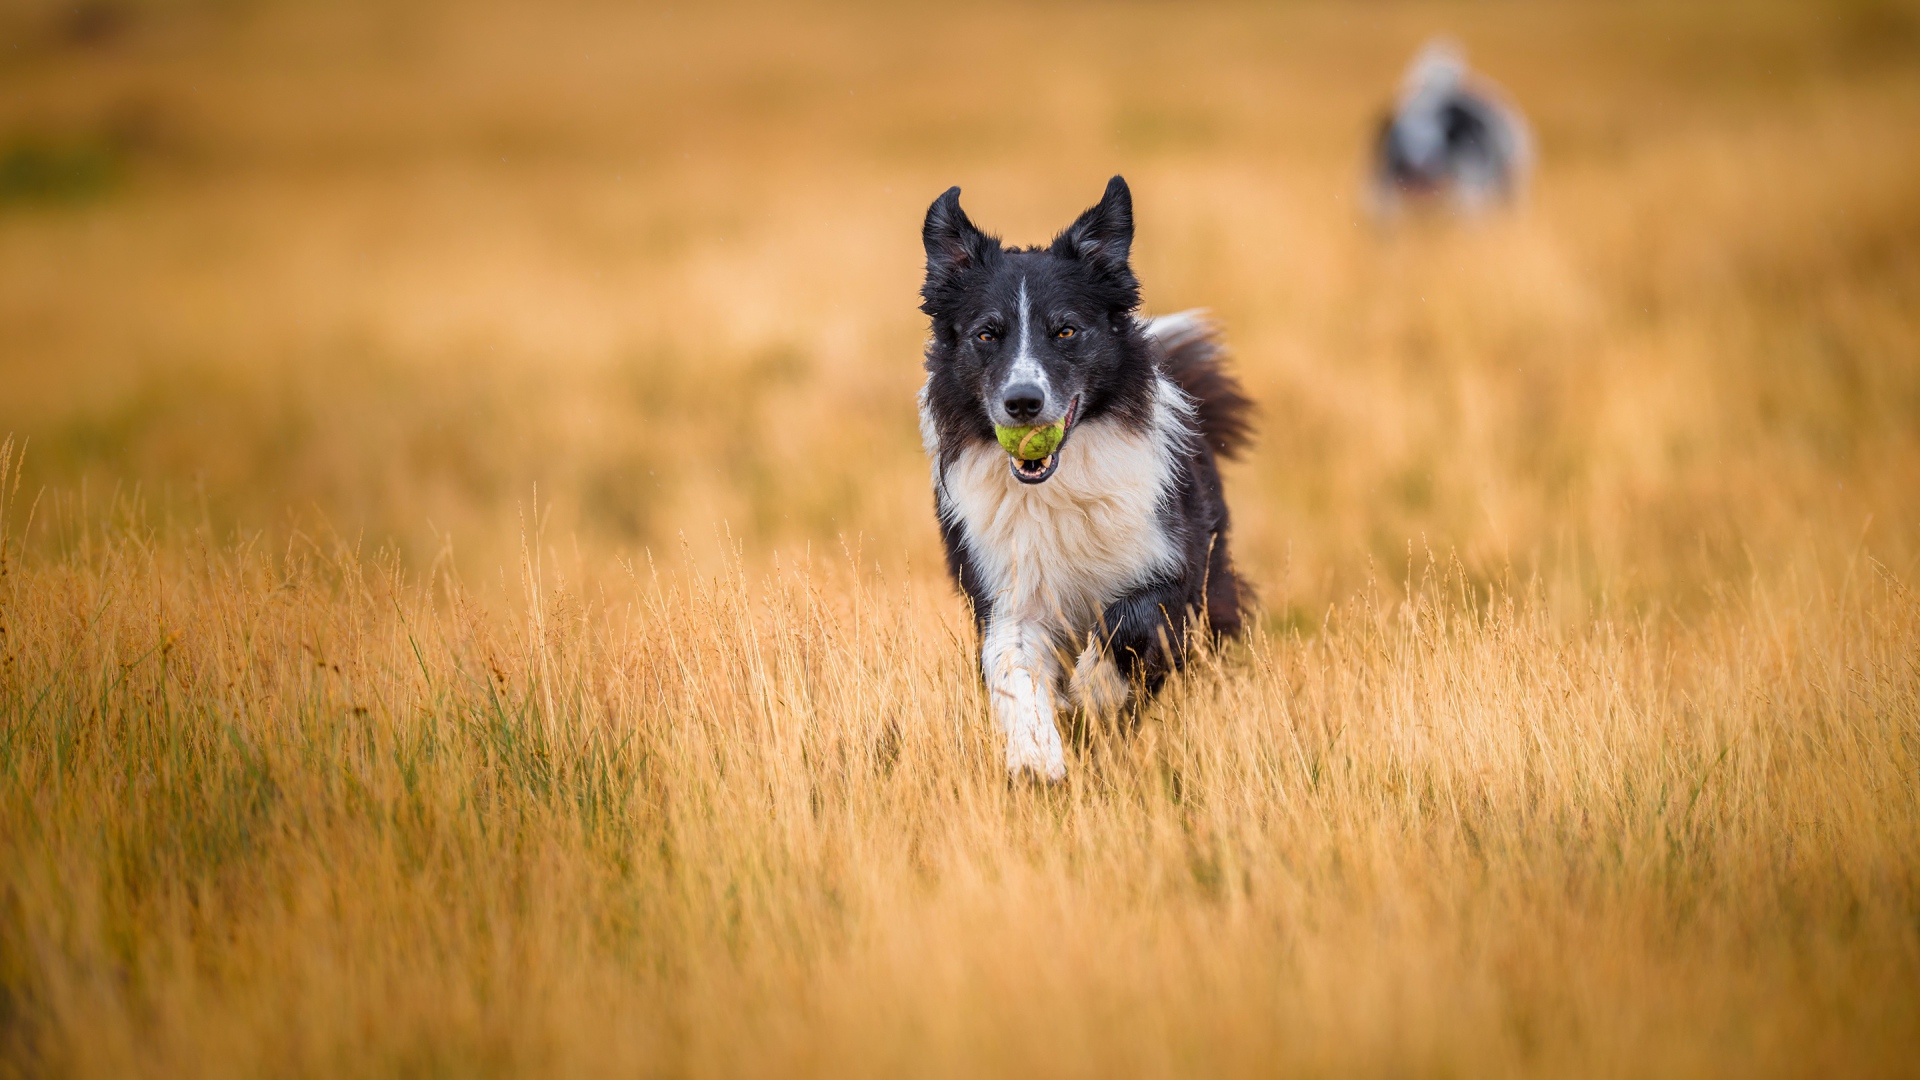 Border Collie dog with a ball in his mouth runs across the field